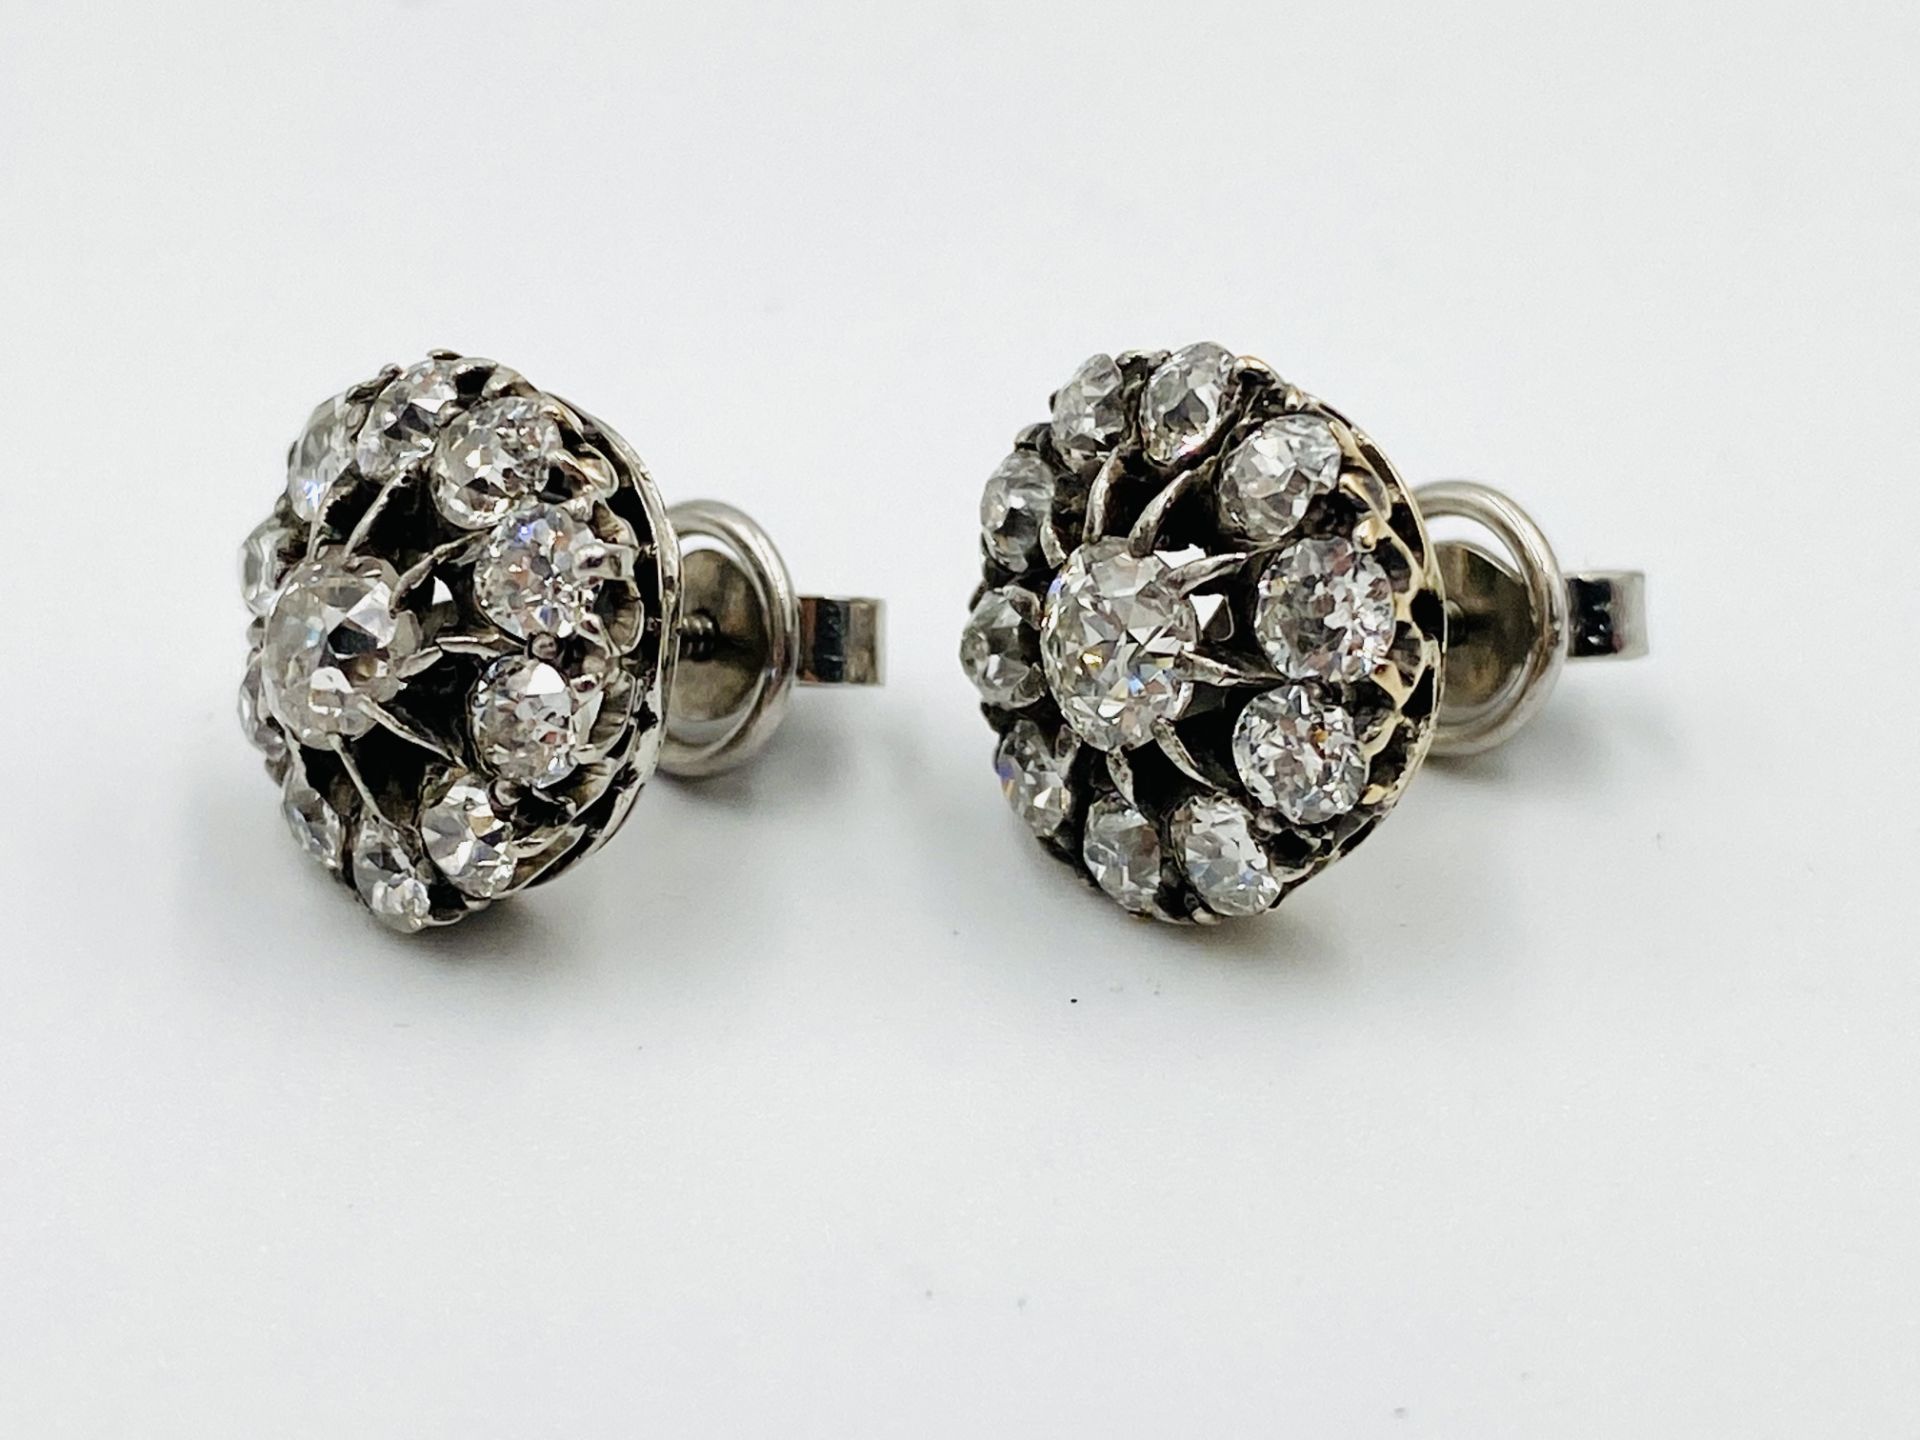 Pair of Victorian white gold and diamond floral earrings - Image 3 of 4